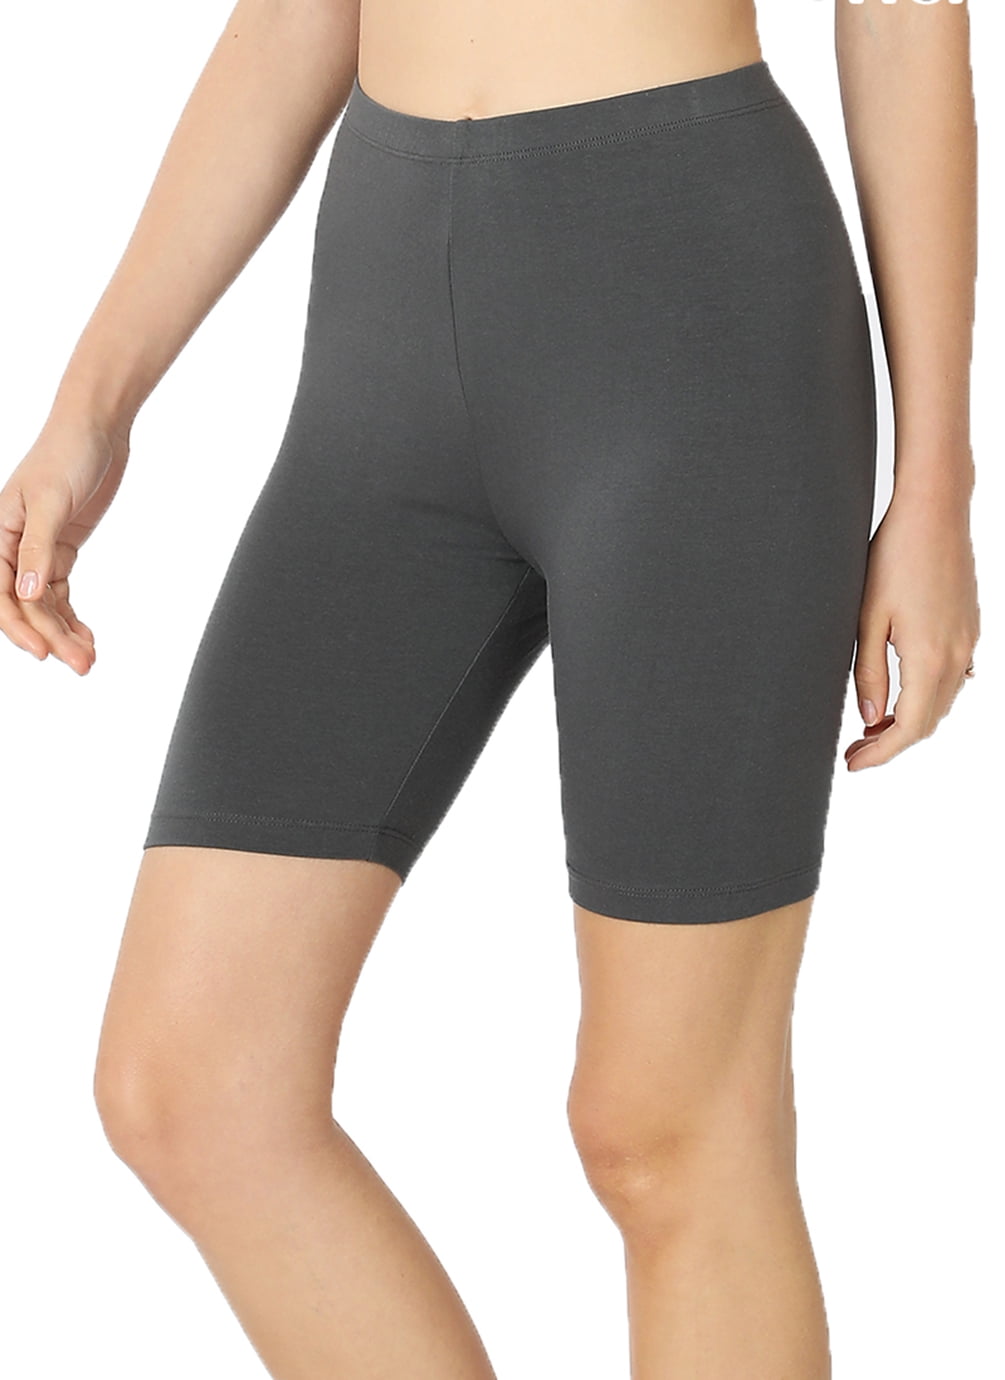 Bike Shorts Are the New Leggings and a Hot Fashion Trend | Looks  informales, Moda, Ropa